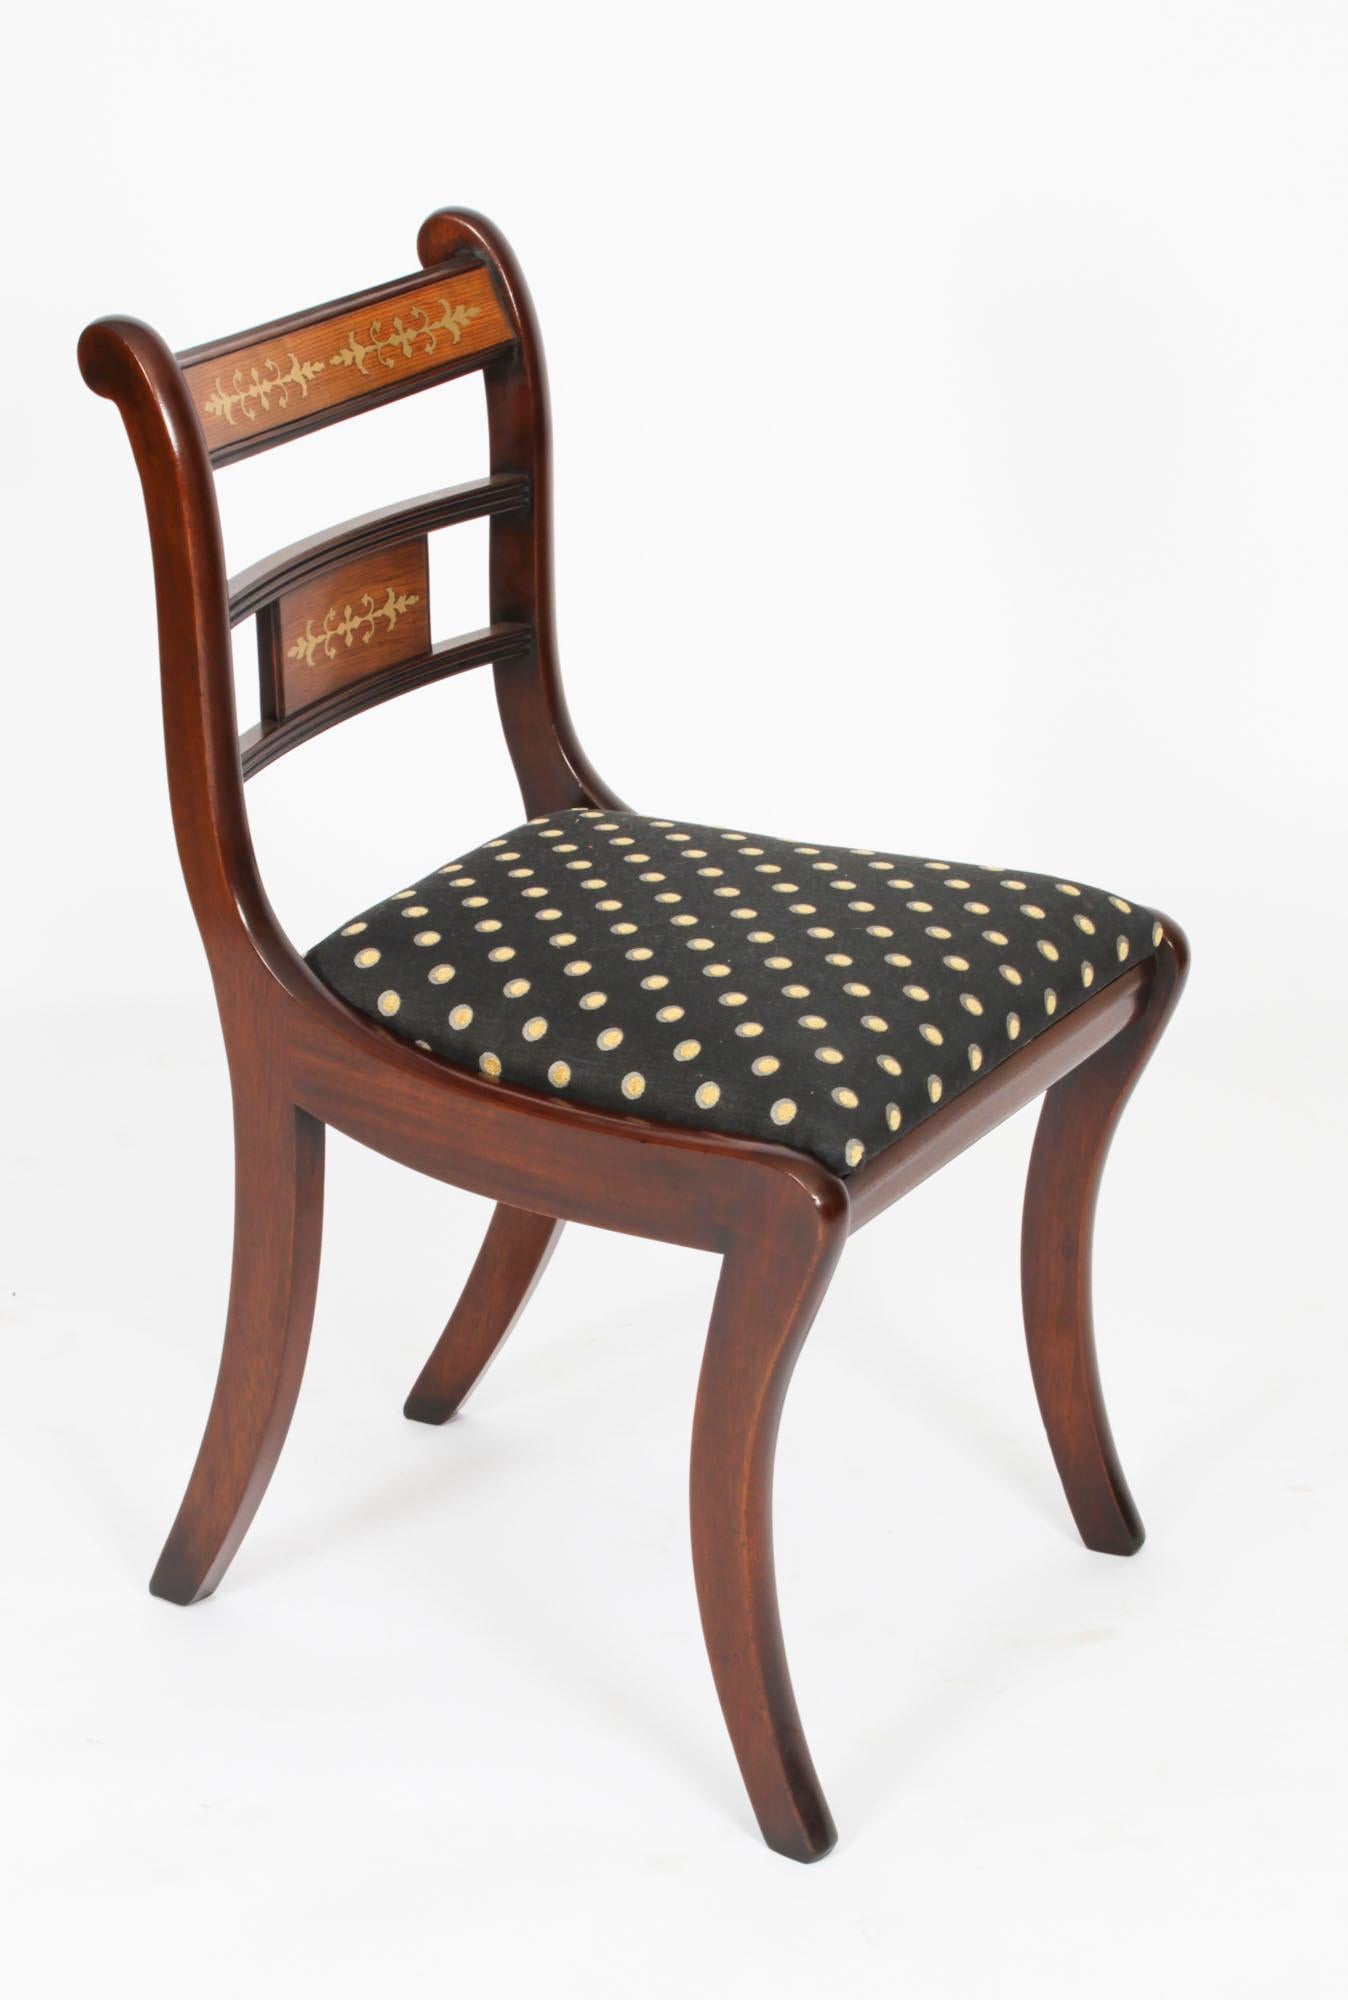 An absolutely superb English-made Vintage set of ten brass inlaid Regency Revival dining chairs dating from the late 20th century.

These chairs have been masterfully hand crafted in beautiful solid flame mahogany throughout and the finish and